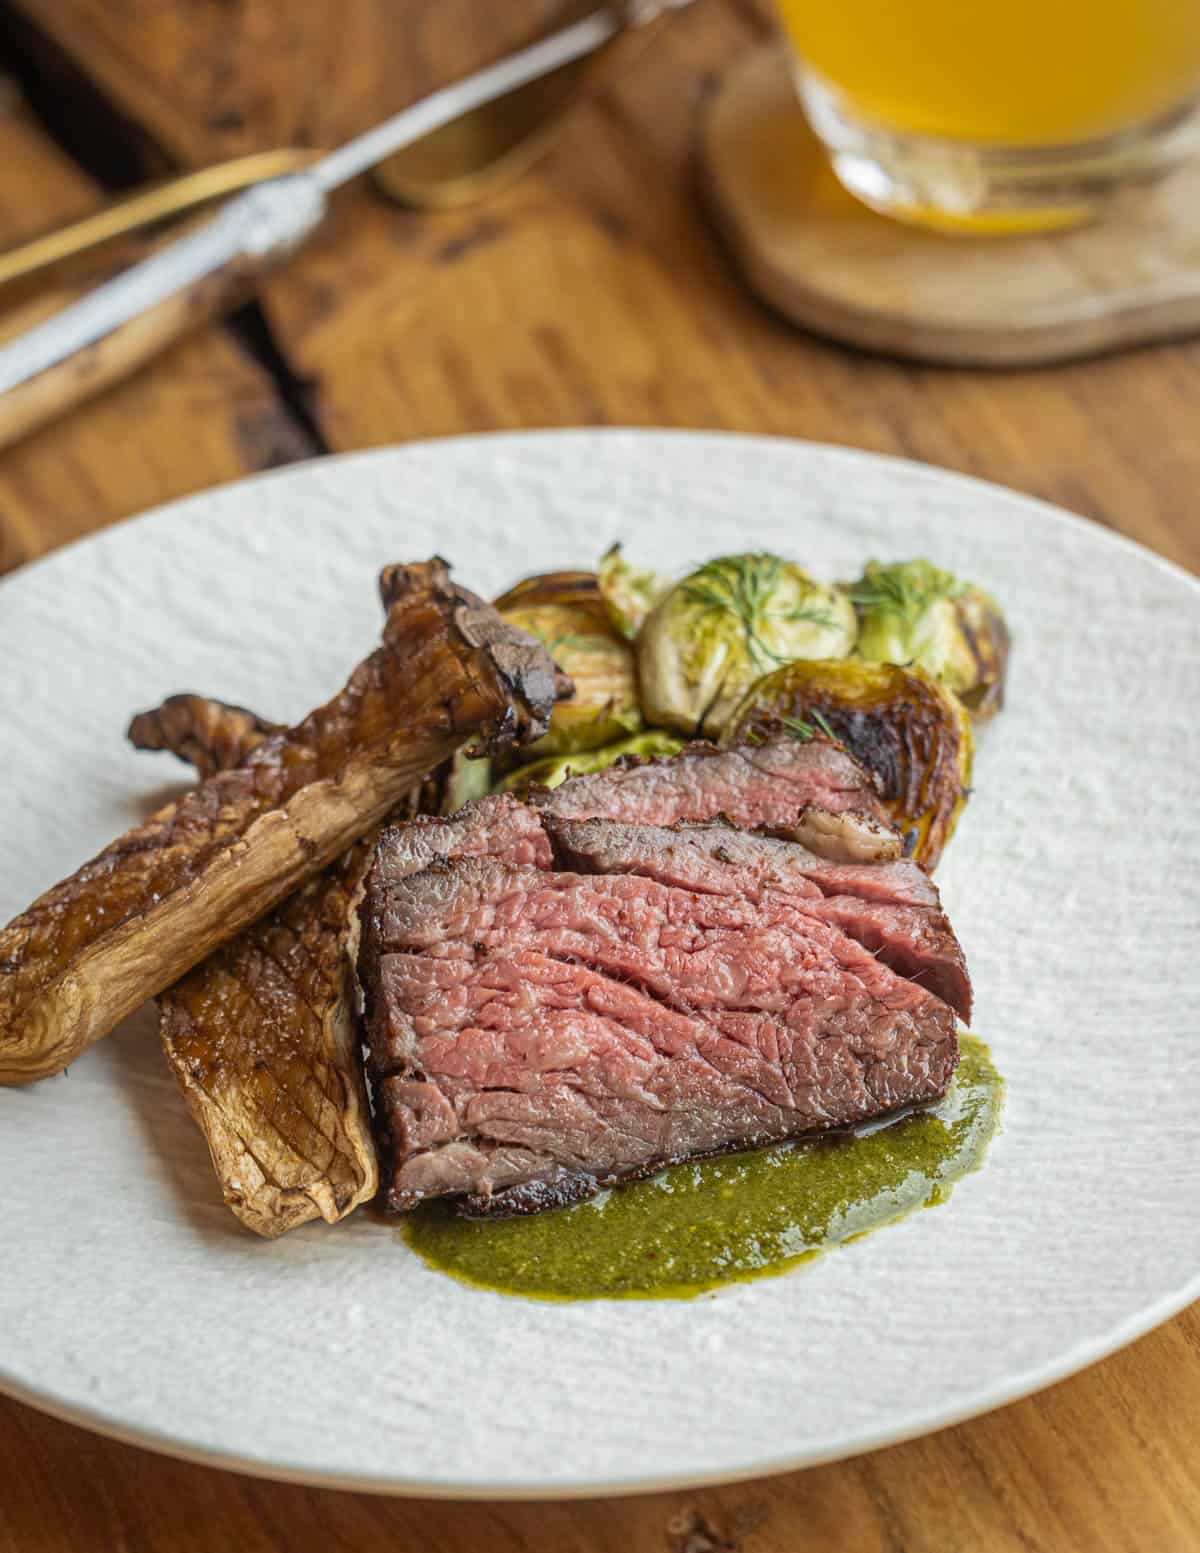 Grilled king oyster mushrooms and bavette steak with chimmichurri sauce.